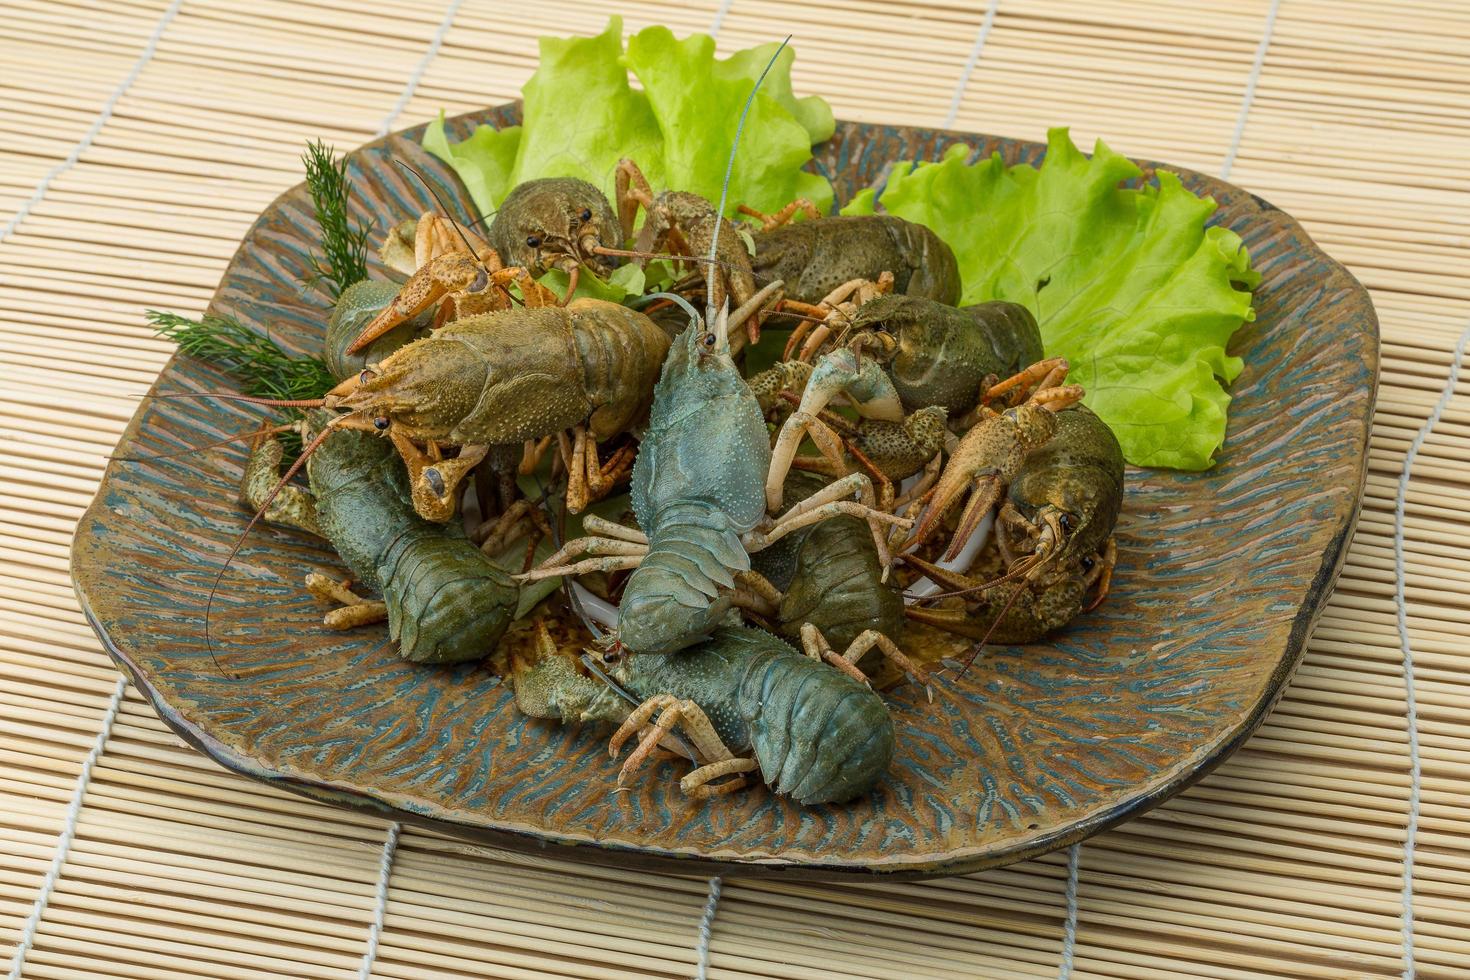 Raw Crayfish on the plate and wooden background photo